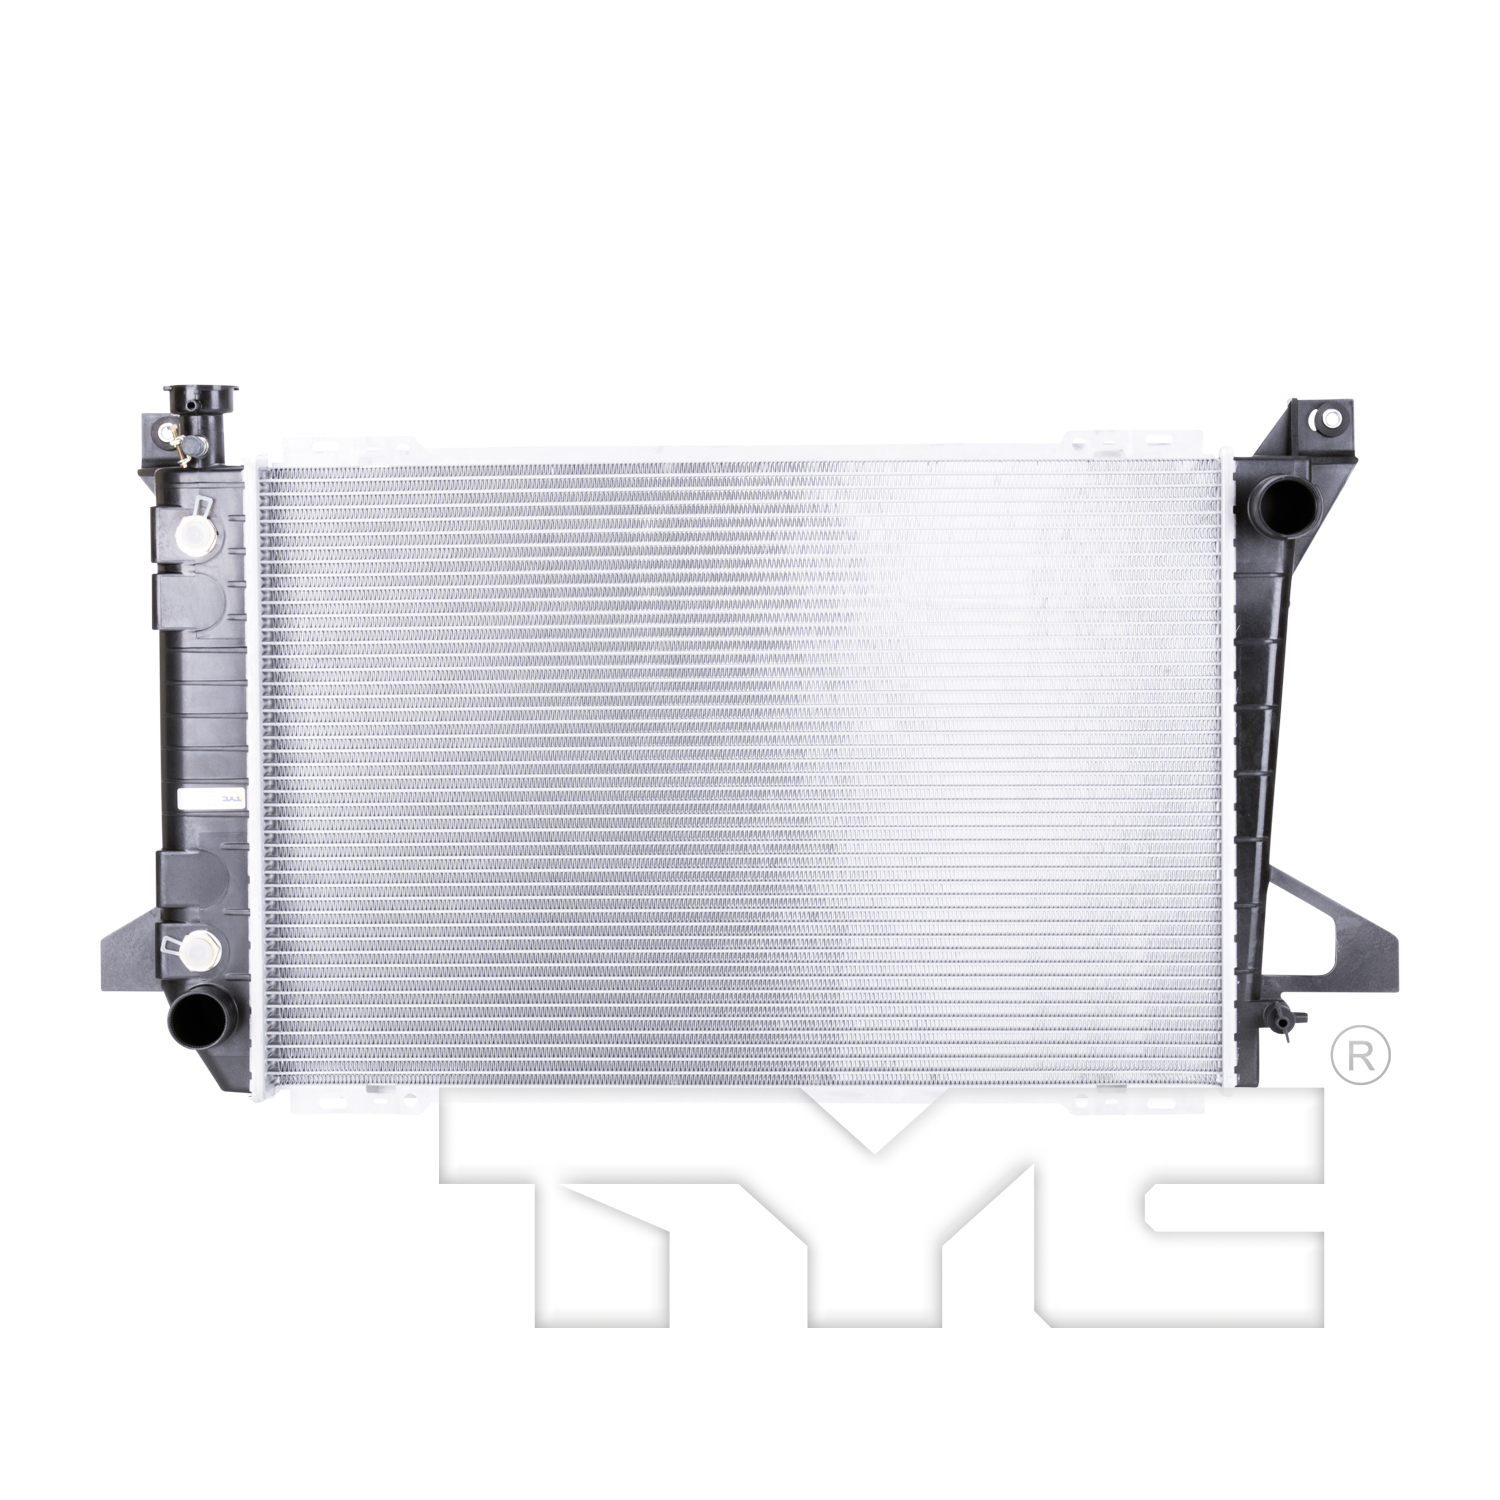 Aftermarket RADIATORS for FORD - F-150, F-150,87-91,Radiator assembly